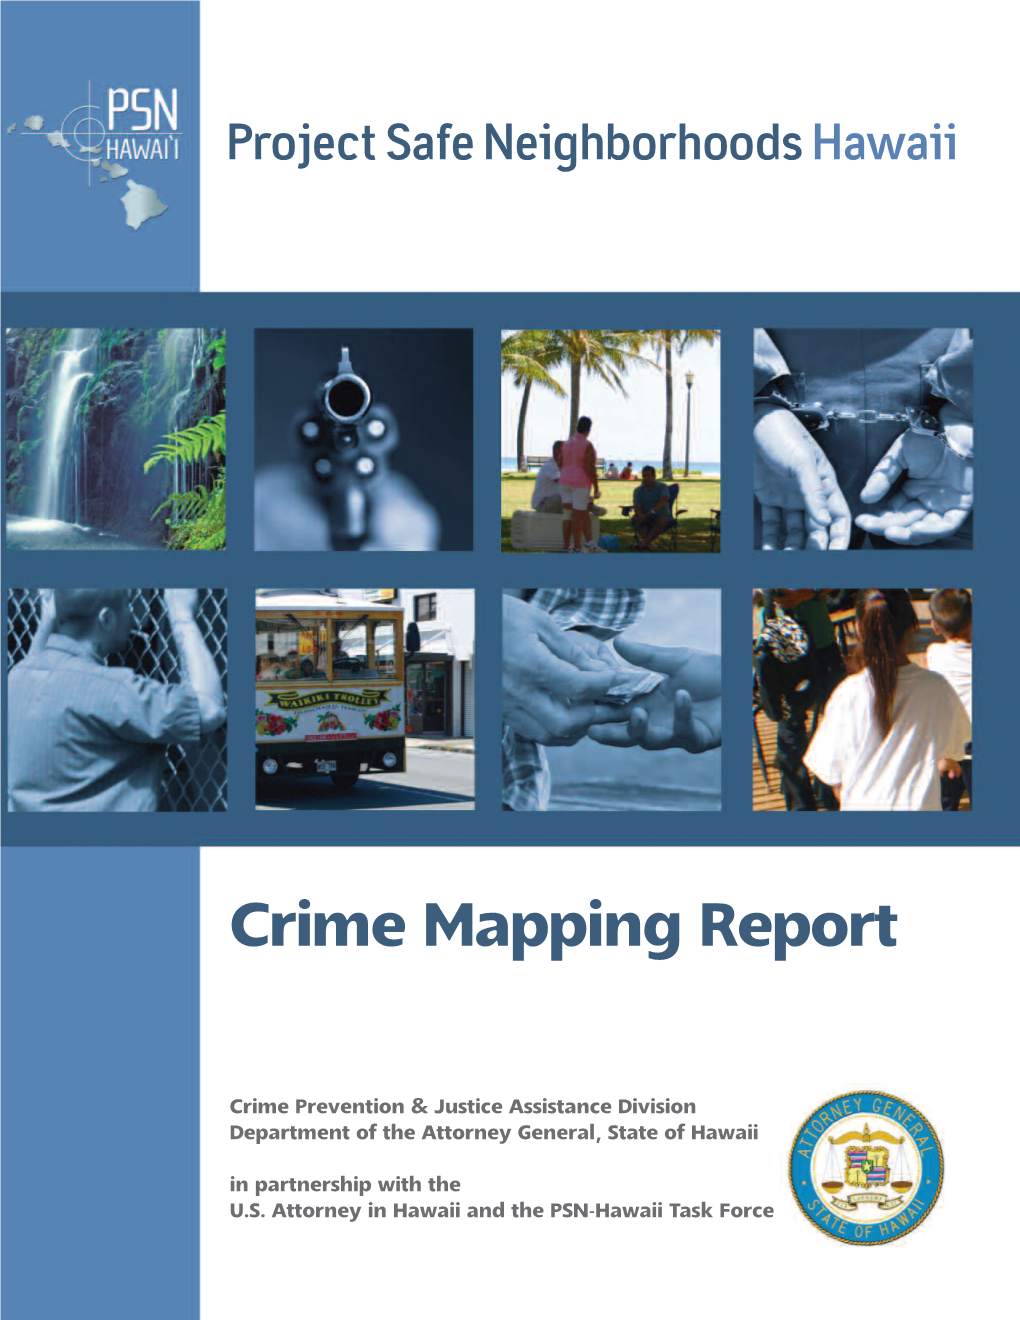 Project Safe Neighborhoods in Hawaii: Crime Mapping Report